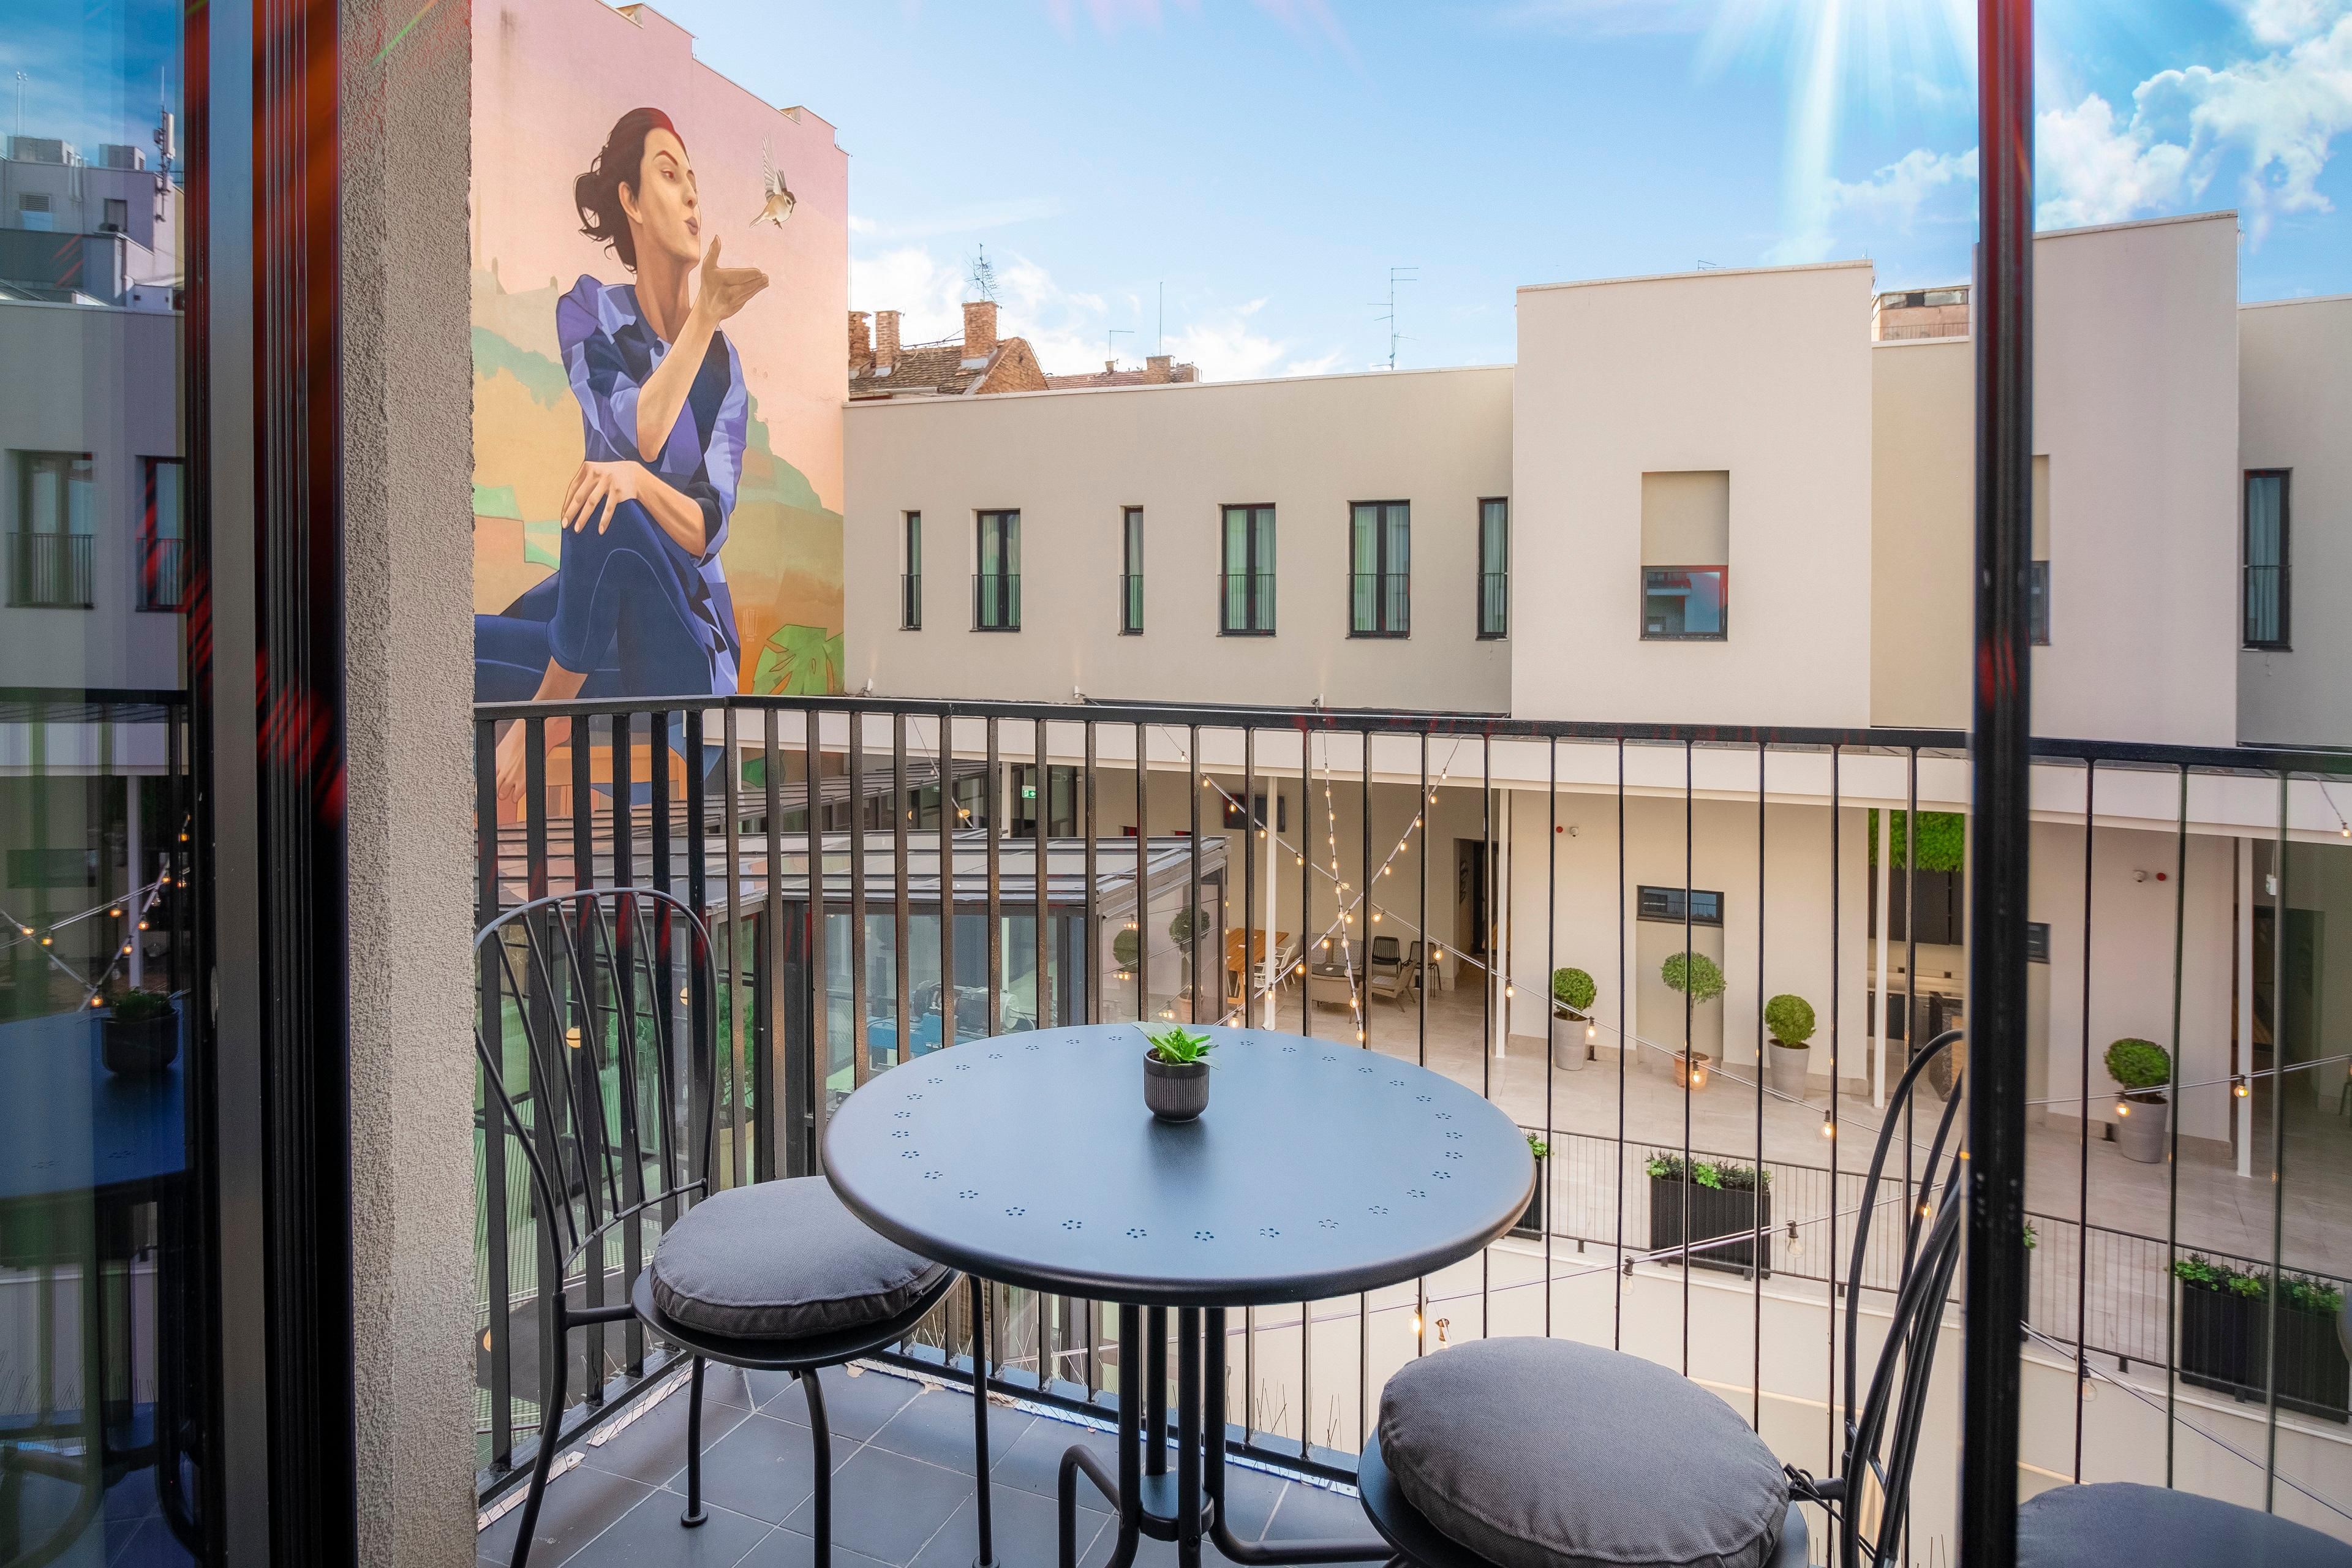 Unwind in our enchanting rooms with private balconies at Hotel Indigo. Bask in the open-air serenity, soak in captivating views, and make the most of your stay. Your personal balcony oasis awaits.